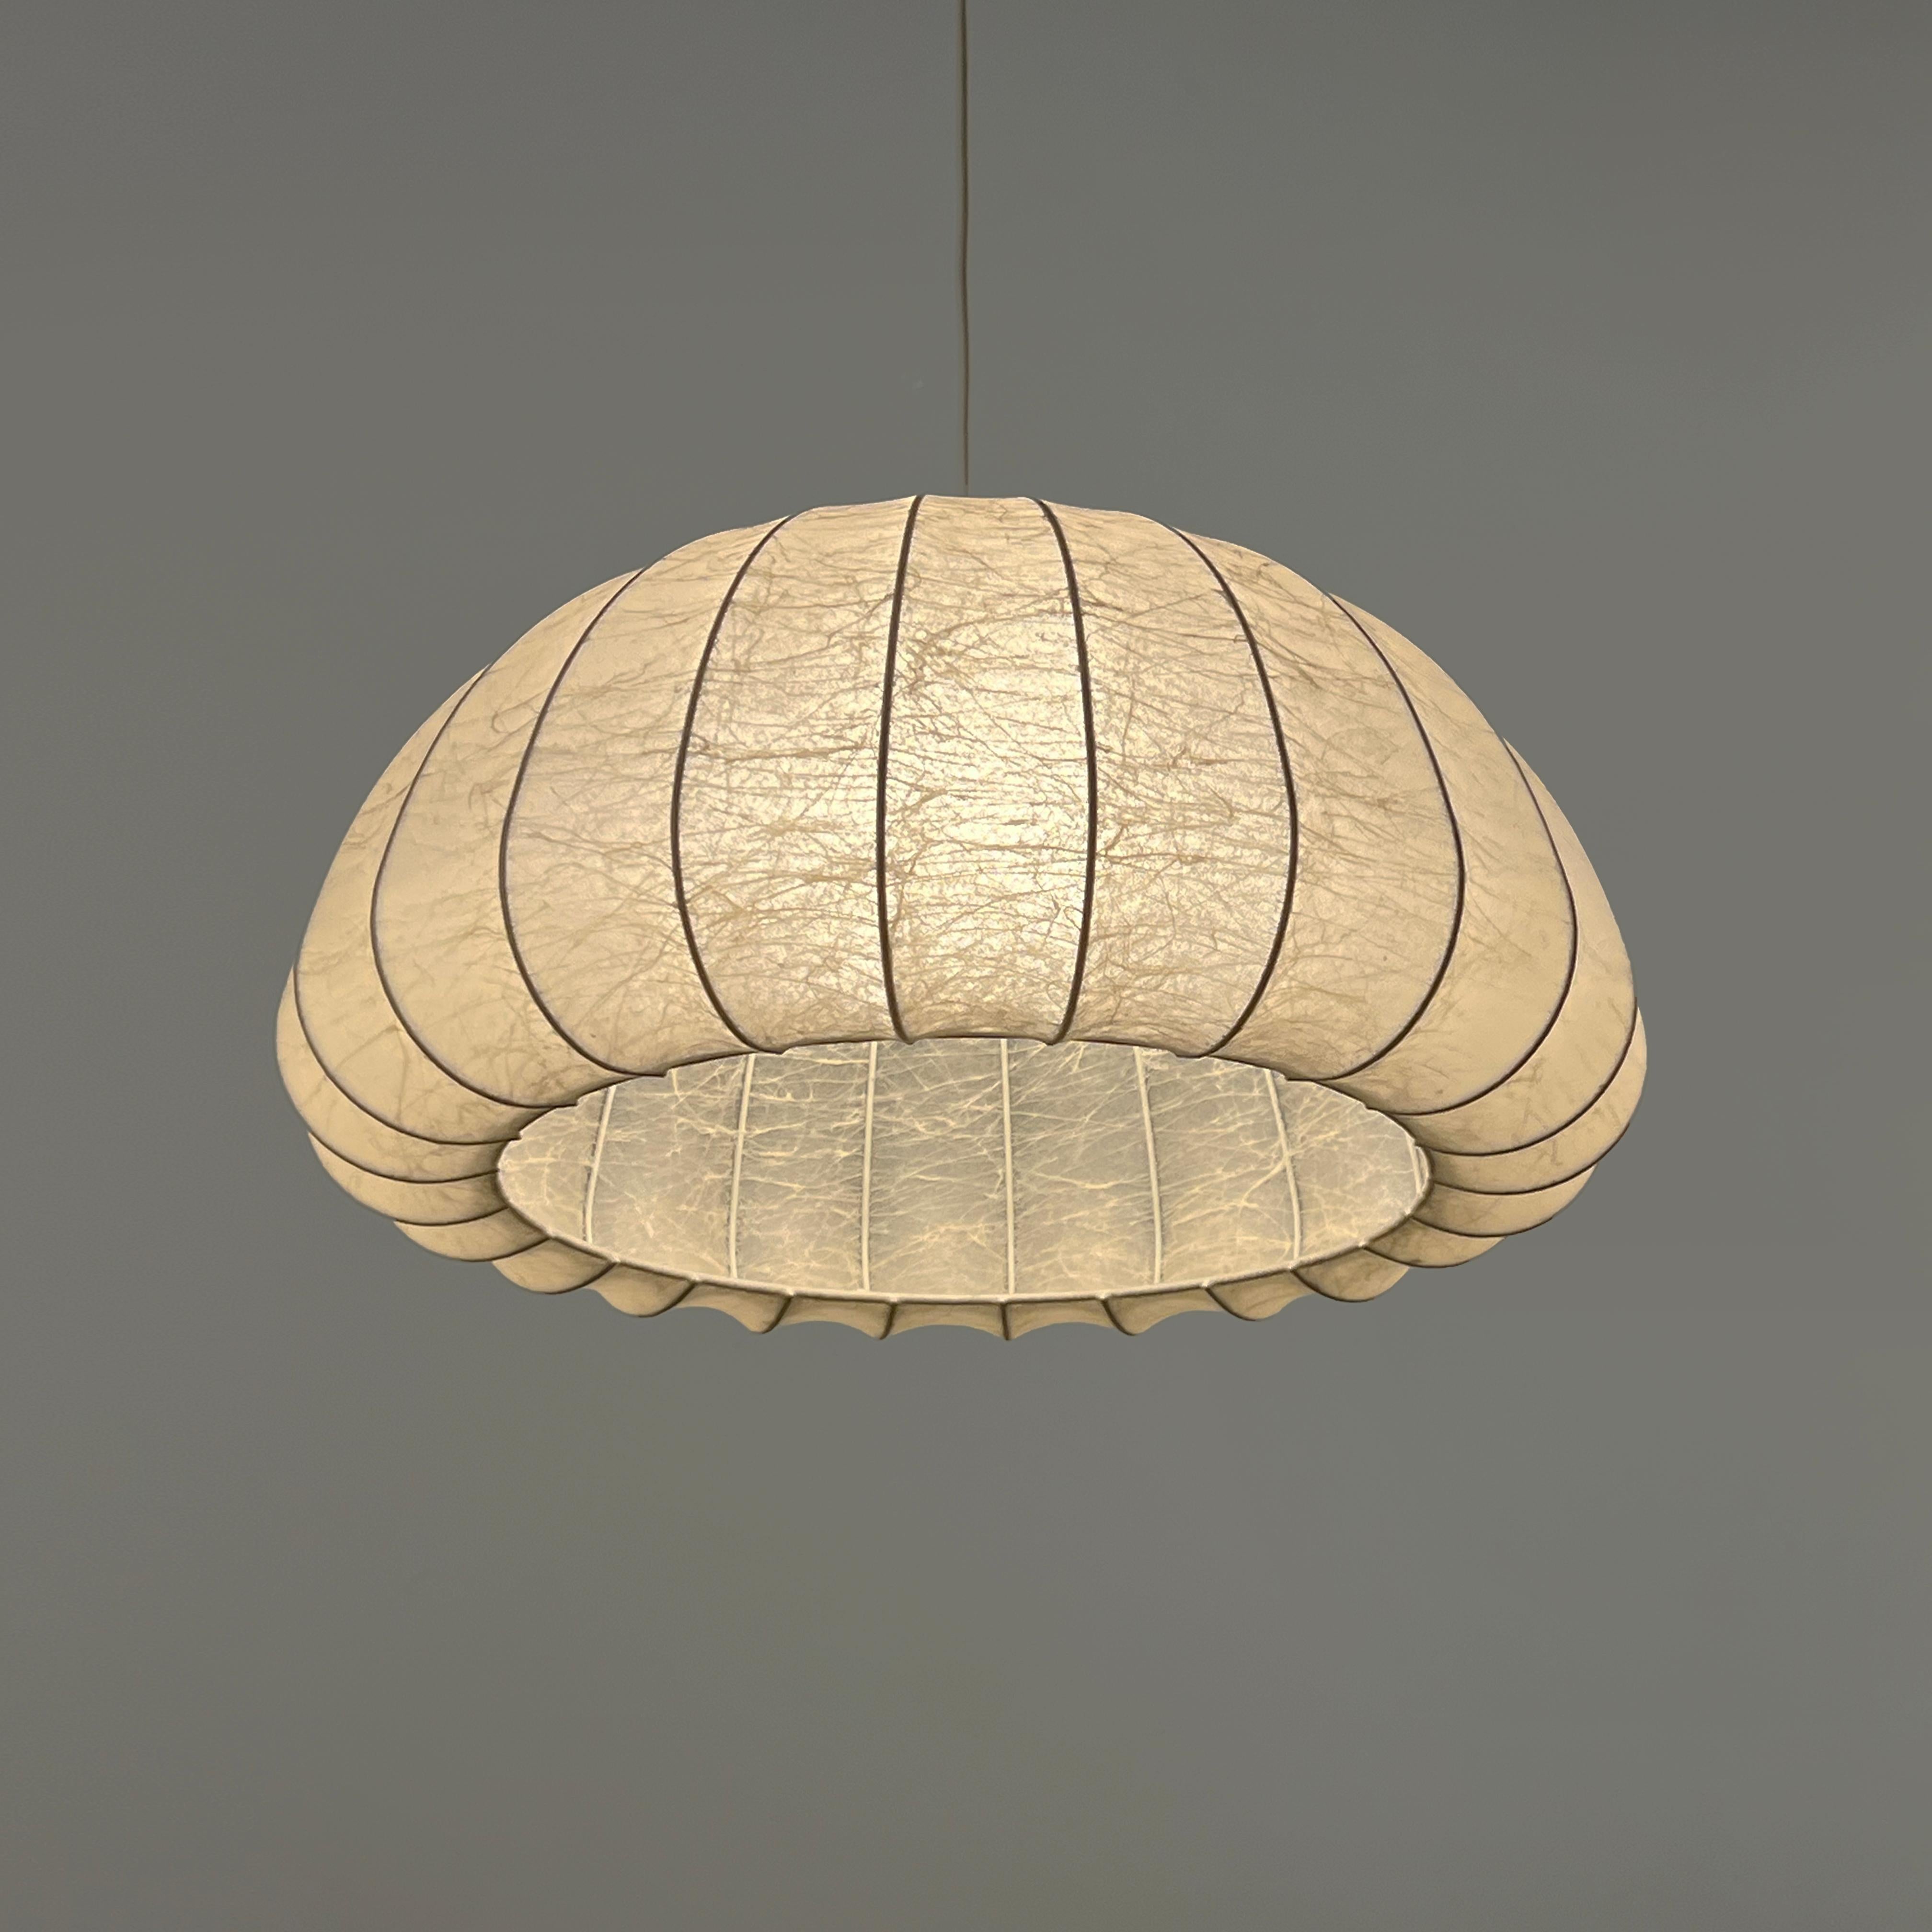 Cocoon chandelier attributed to Friedel Wauer for Goldkant Leuchten, Germany 1970s

This exquisitely elegant cocoon chandelier attributed to Friedel Wauer for the Goldkant Leuchten in Germany during the 1970s showcases a very particular